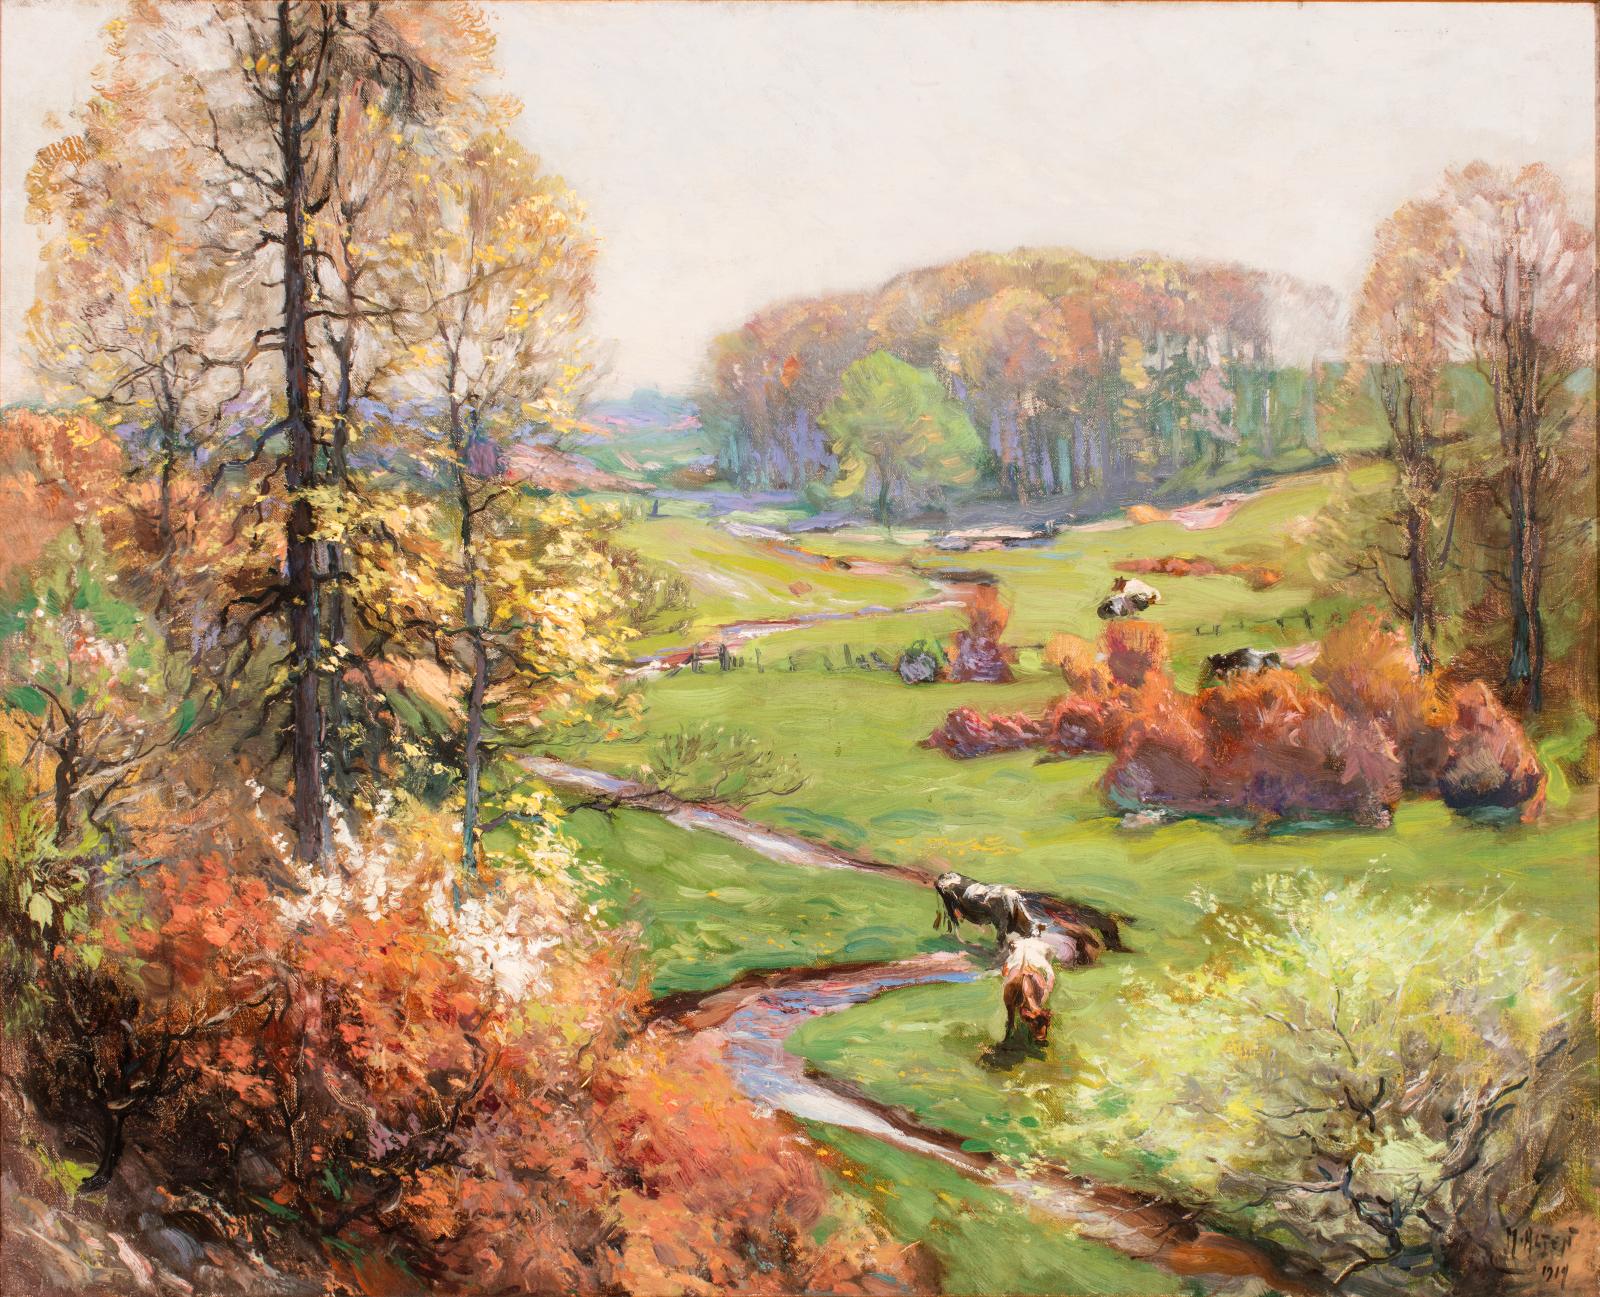 Two cows grazing in foreground of landscape image with green grass, pale sky, yellow leaves, and a meandering stream.